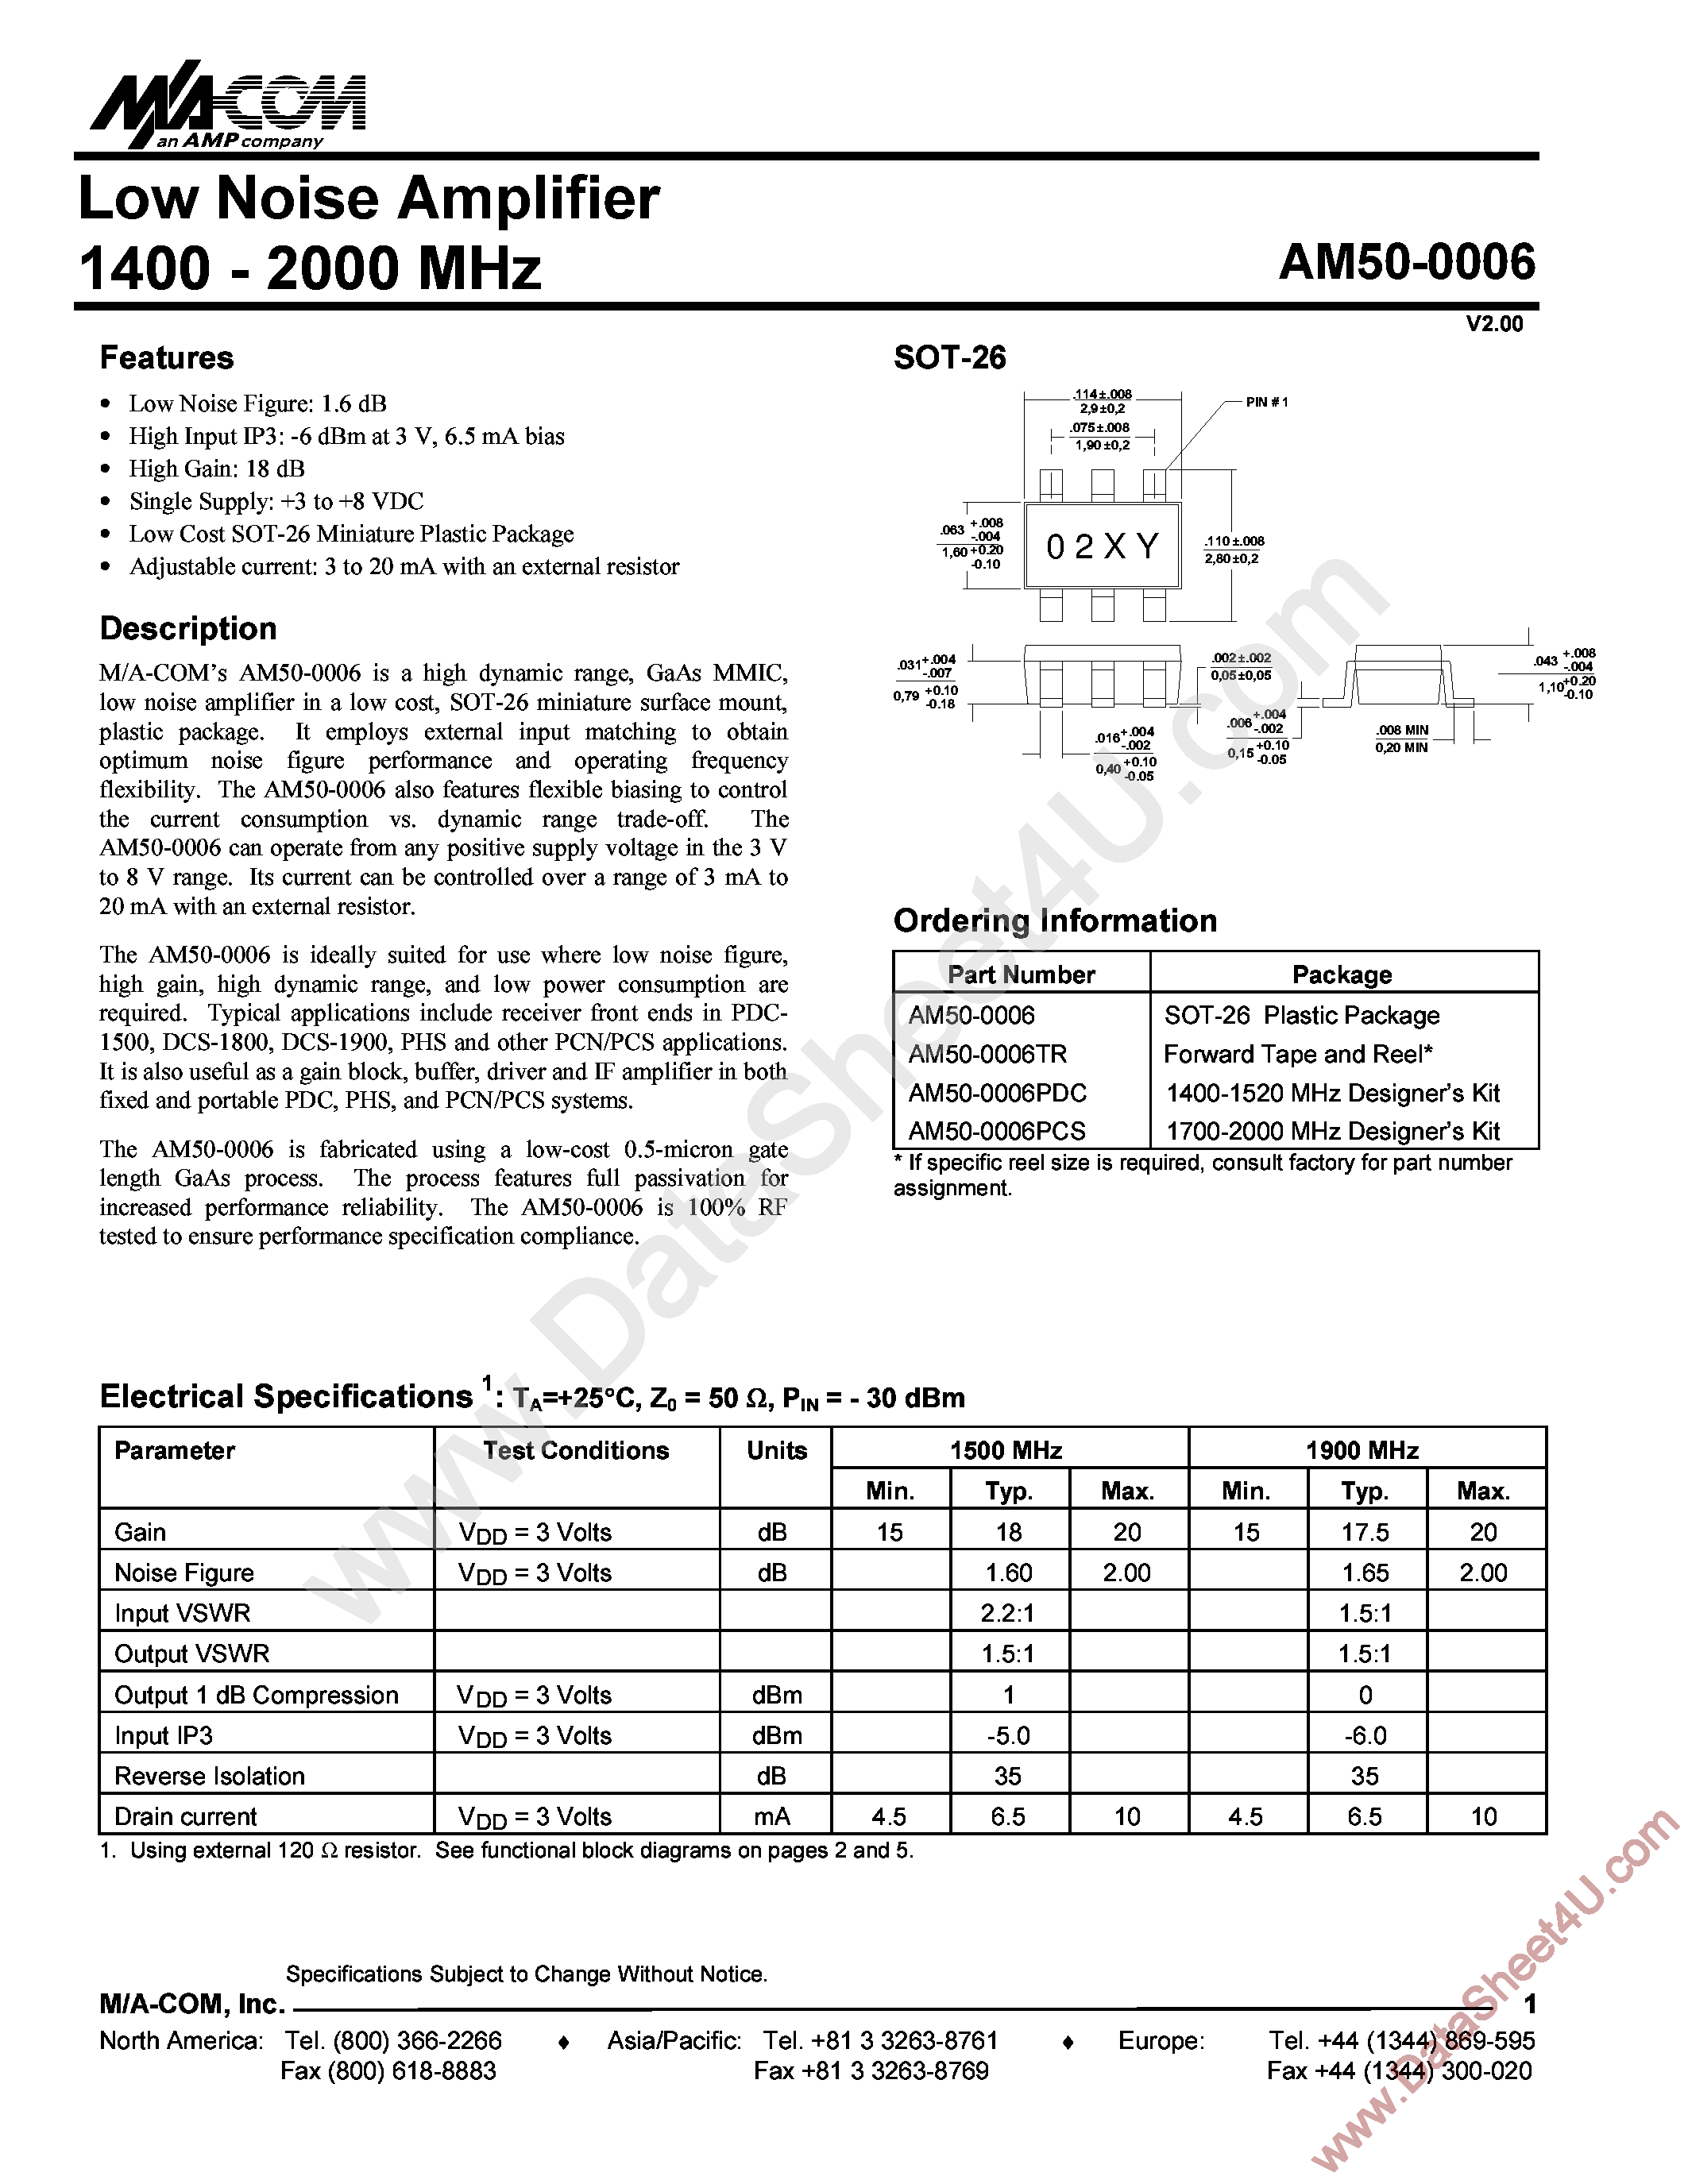 Datasheet AM50-0006V2 - Low Noise Amplifier page 1